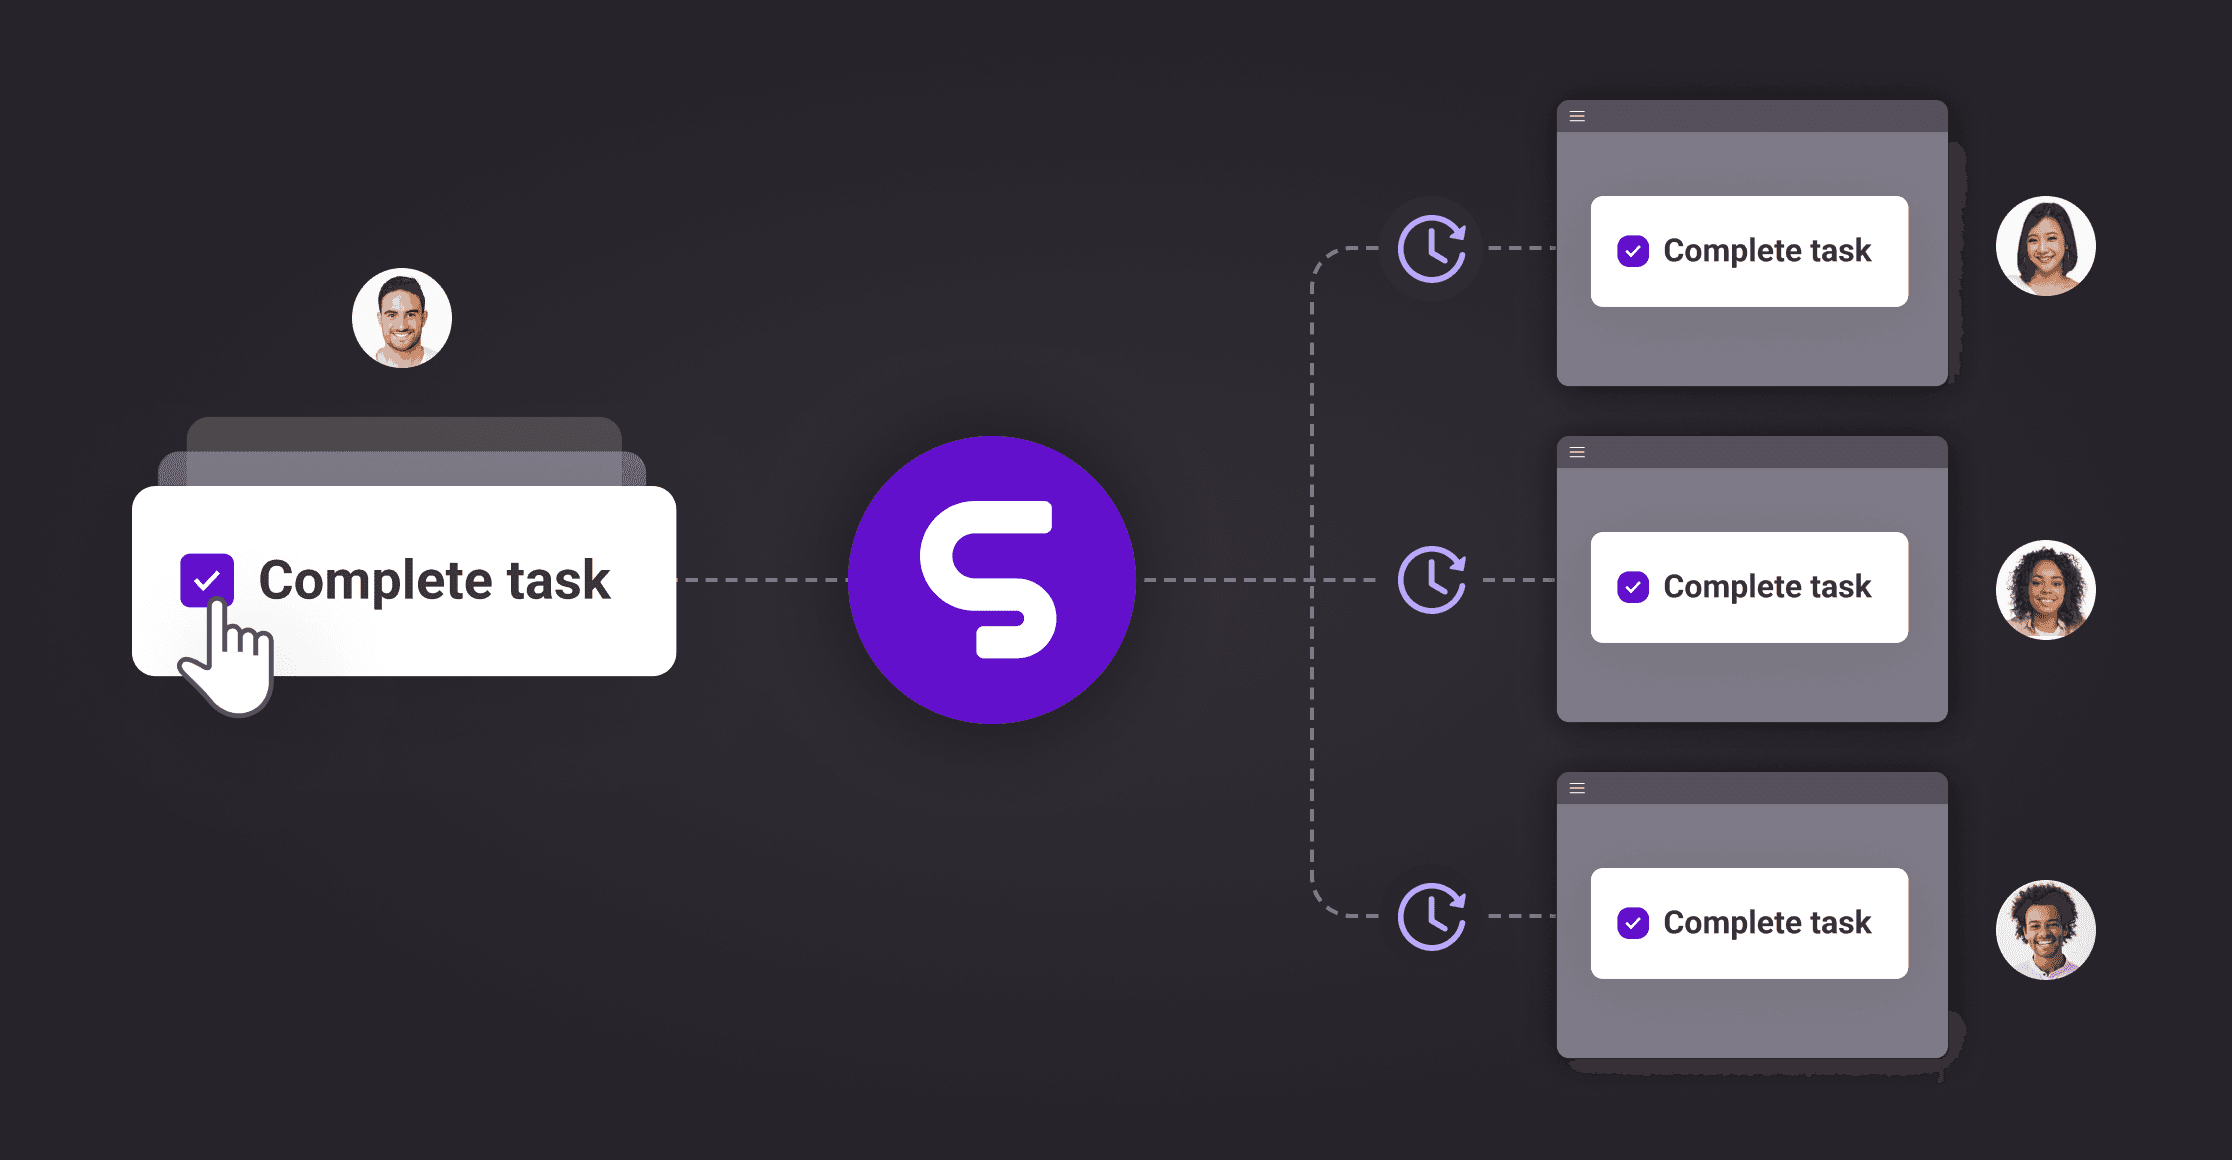 An illustration depicting task completion synchronization using SuperViz. On the left, an image of a task labeled 'Complete task' is being checked off by a hand cursor. This task is connected by a dotted line to a central purple icon with an 'S' symbol, representing SuperViz. On the right, the central icon branches out to three identical 'Complete task' boxes, each connected to a user profile picture. The users are two women and one man, indicating task updates being synchronized in real-time for different users.